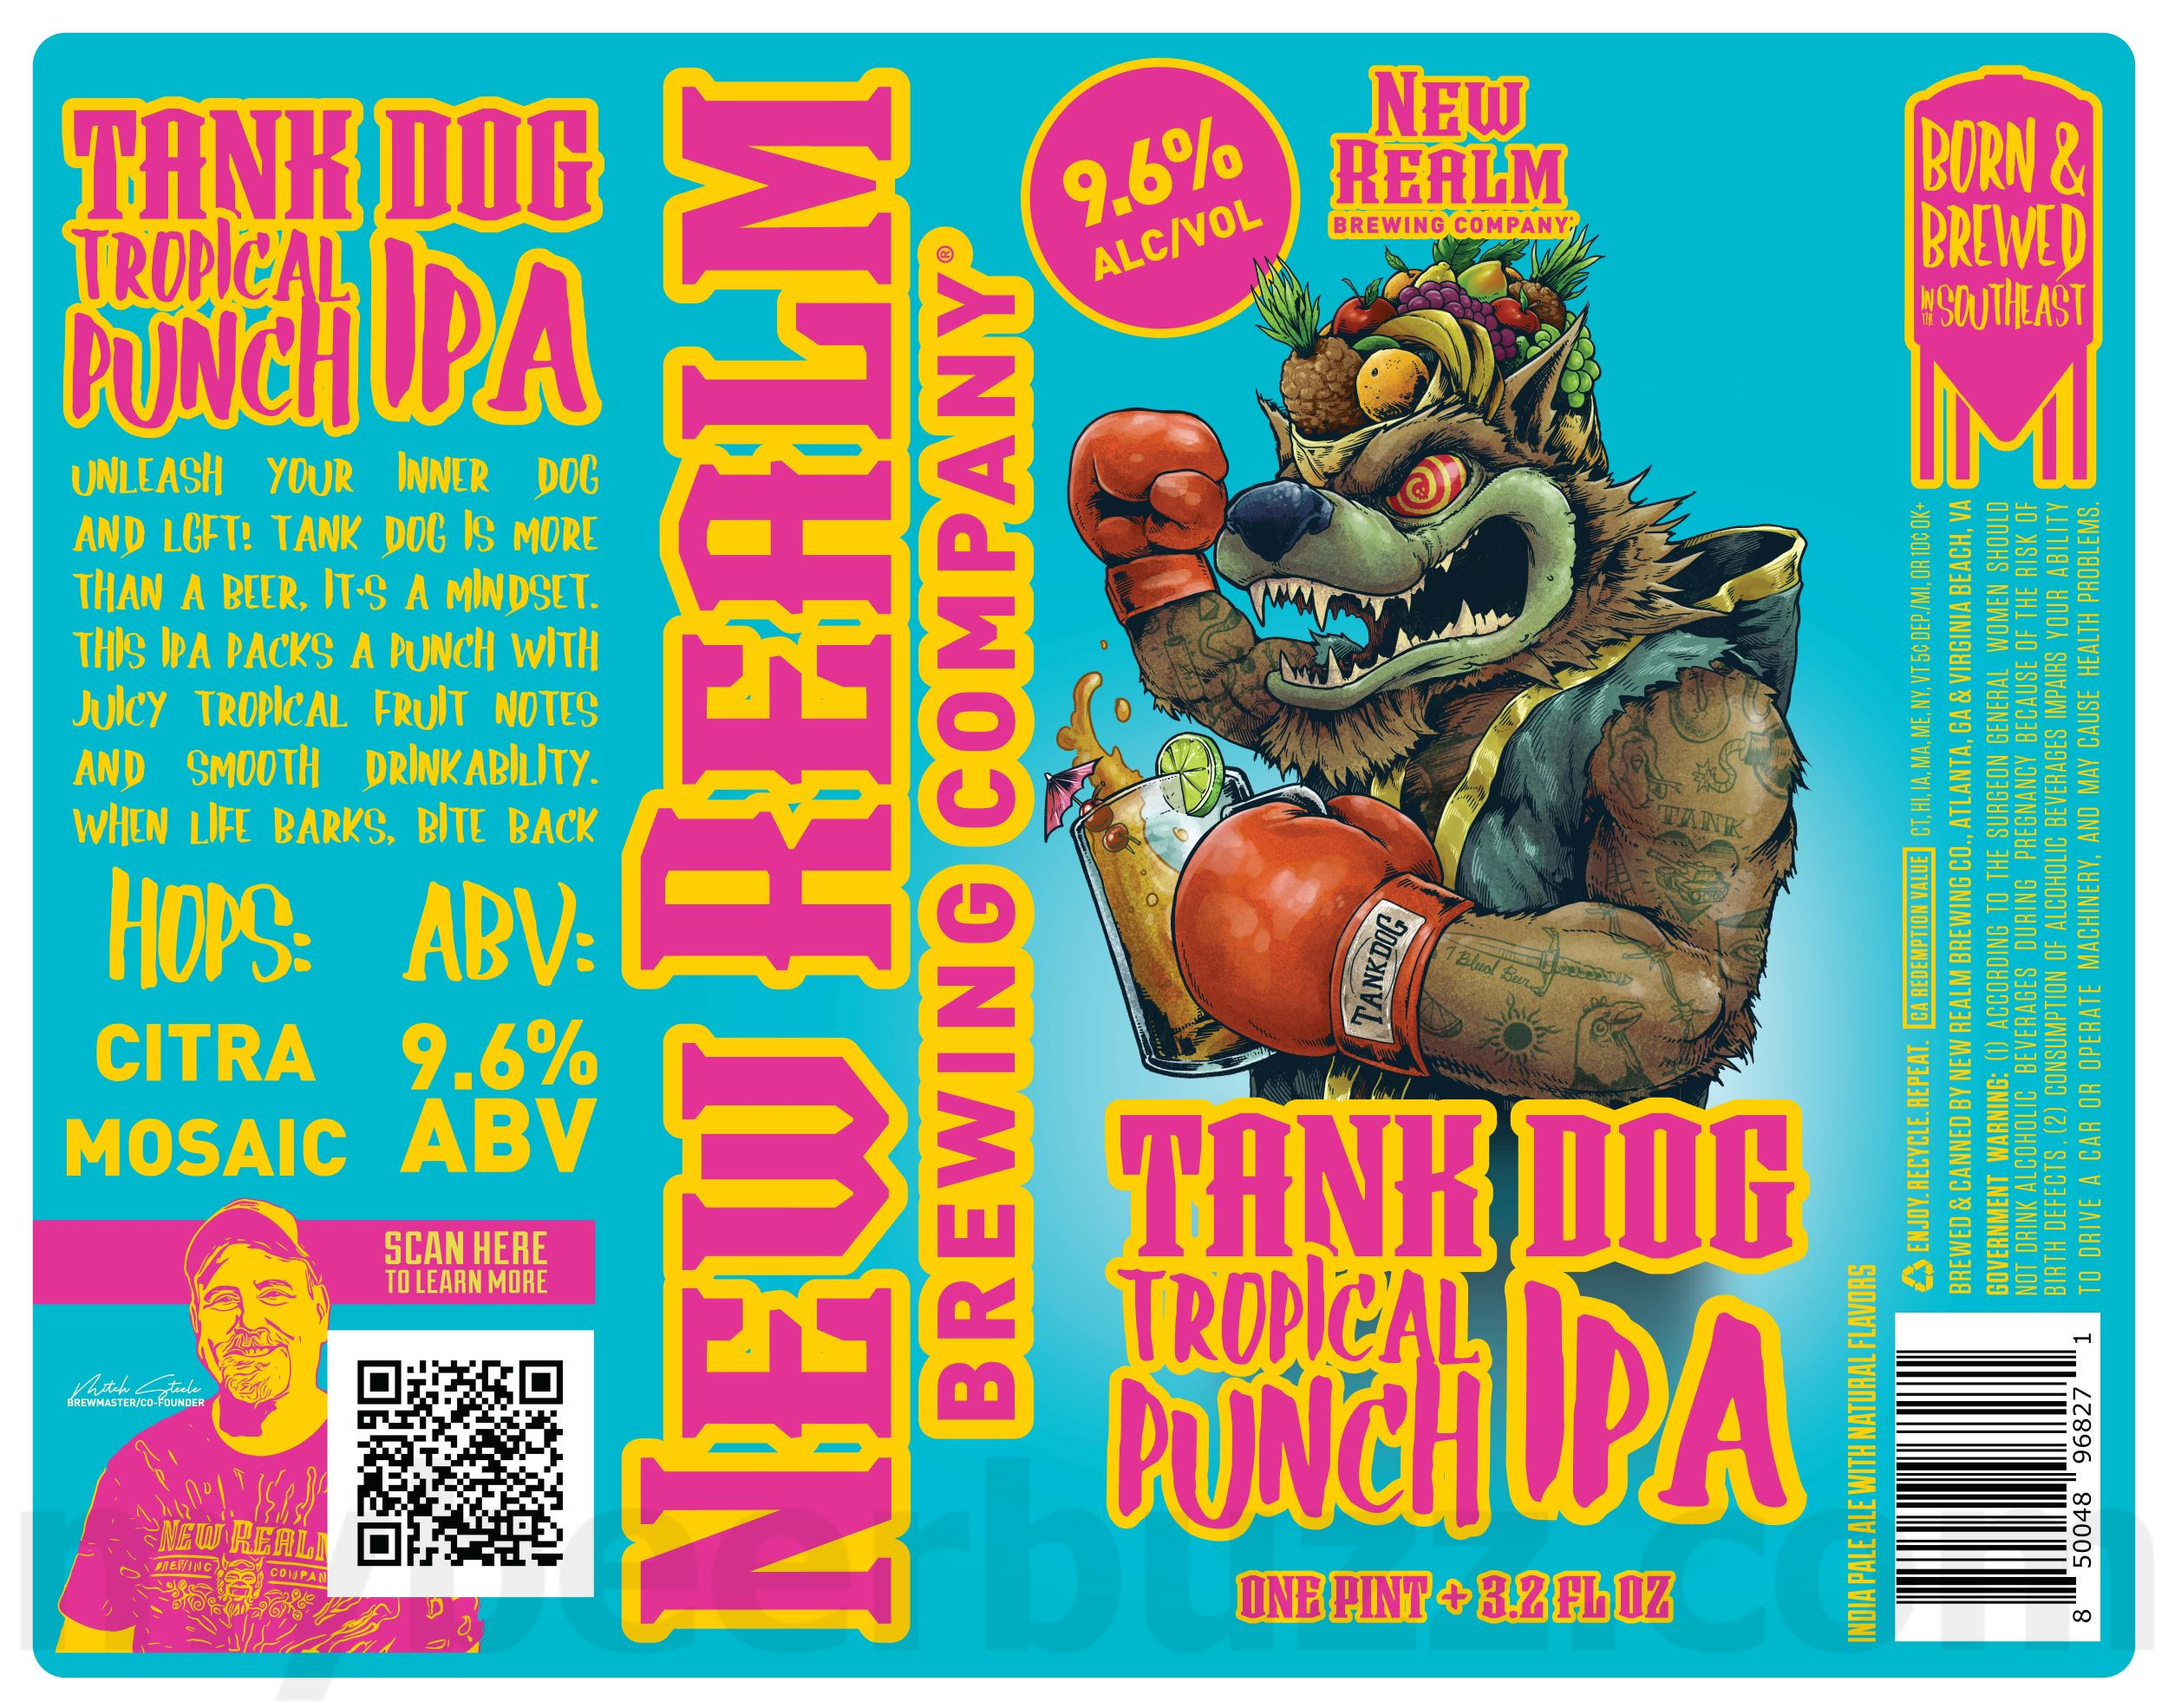 New Realm Adding Tank Dog Tropical Punch IPA